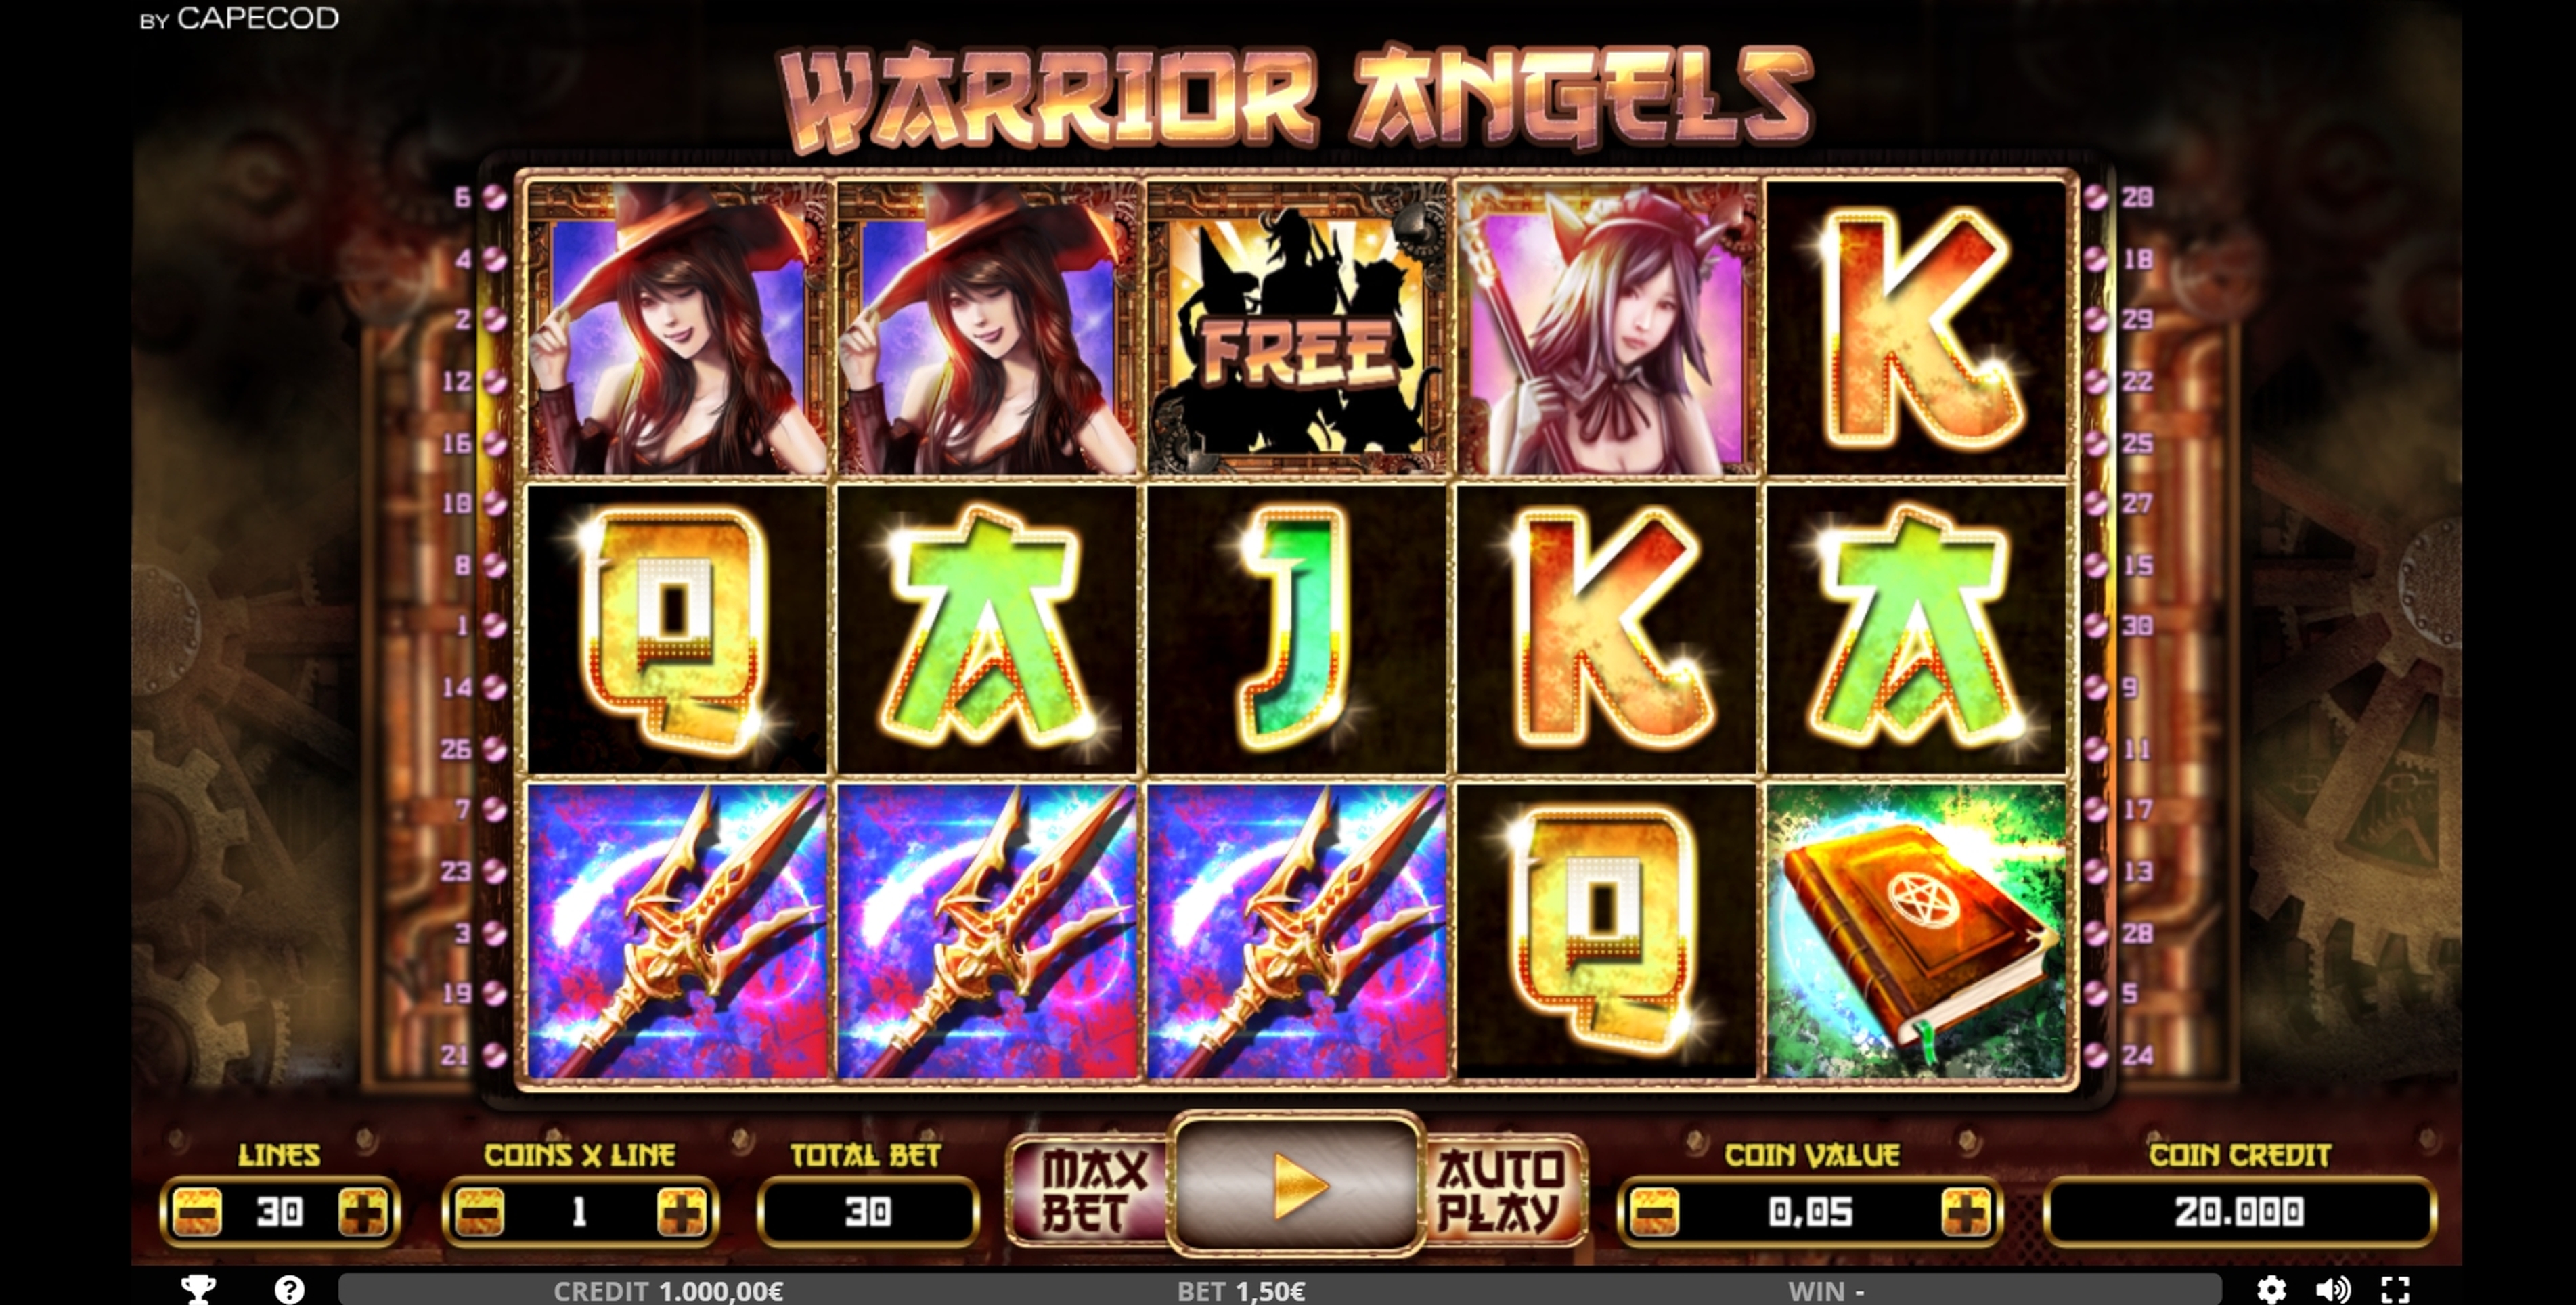 Reels in Warrior Angels Slot Game by Capecod Gaming